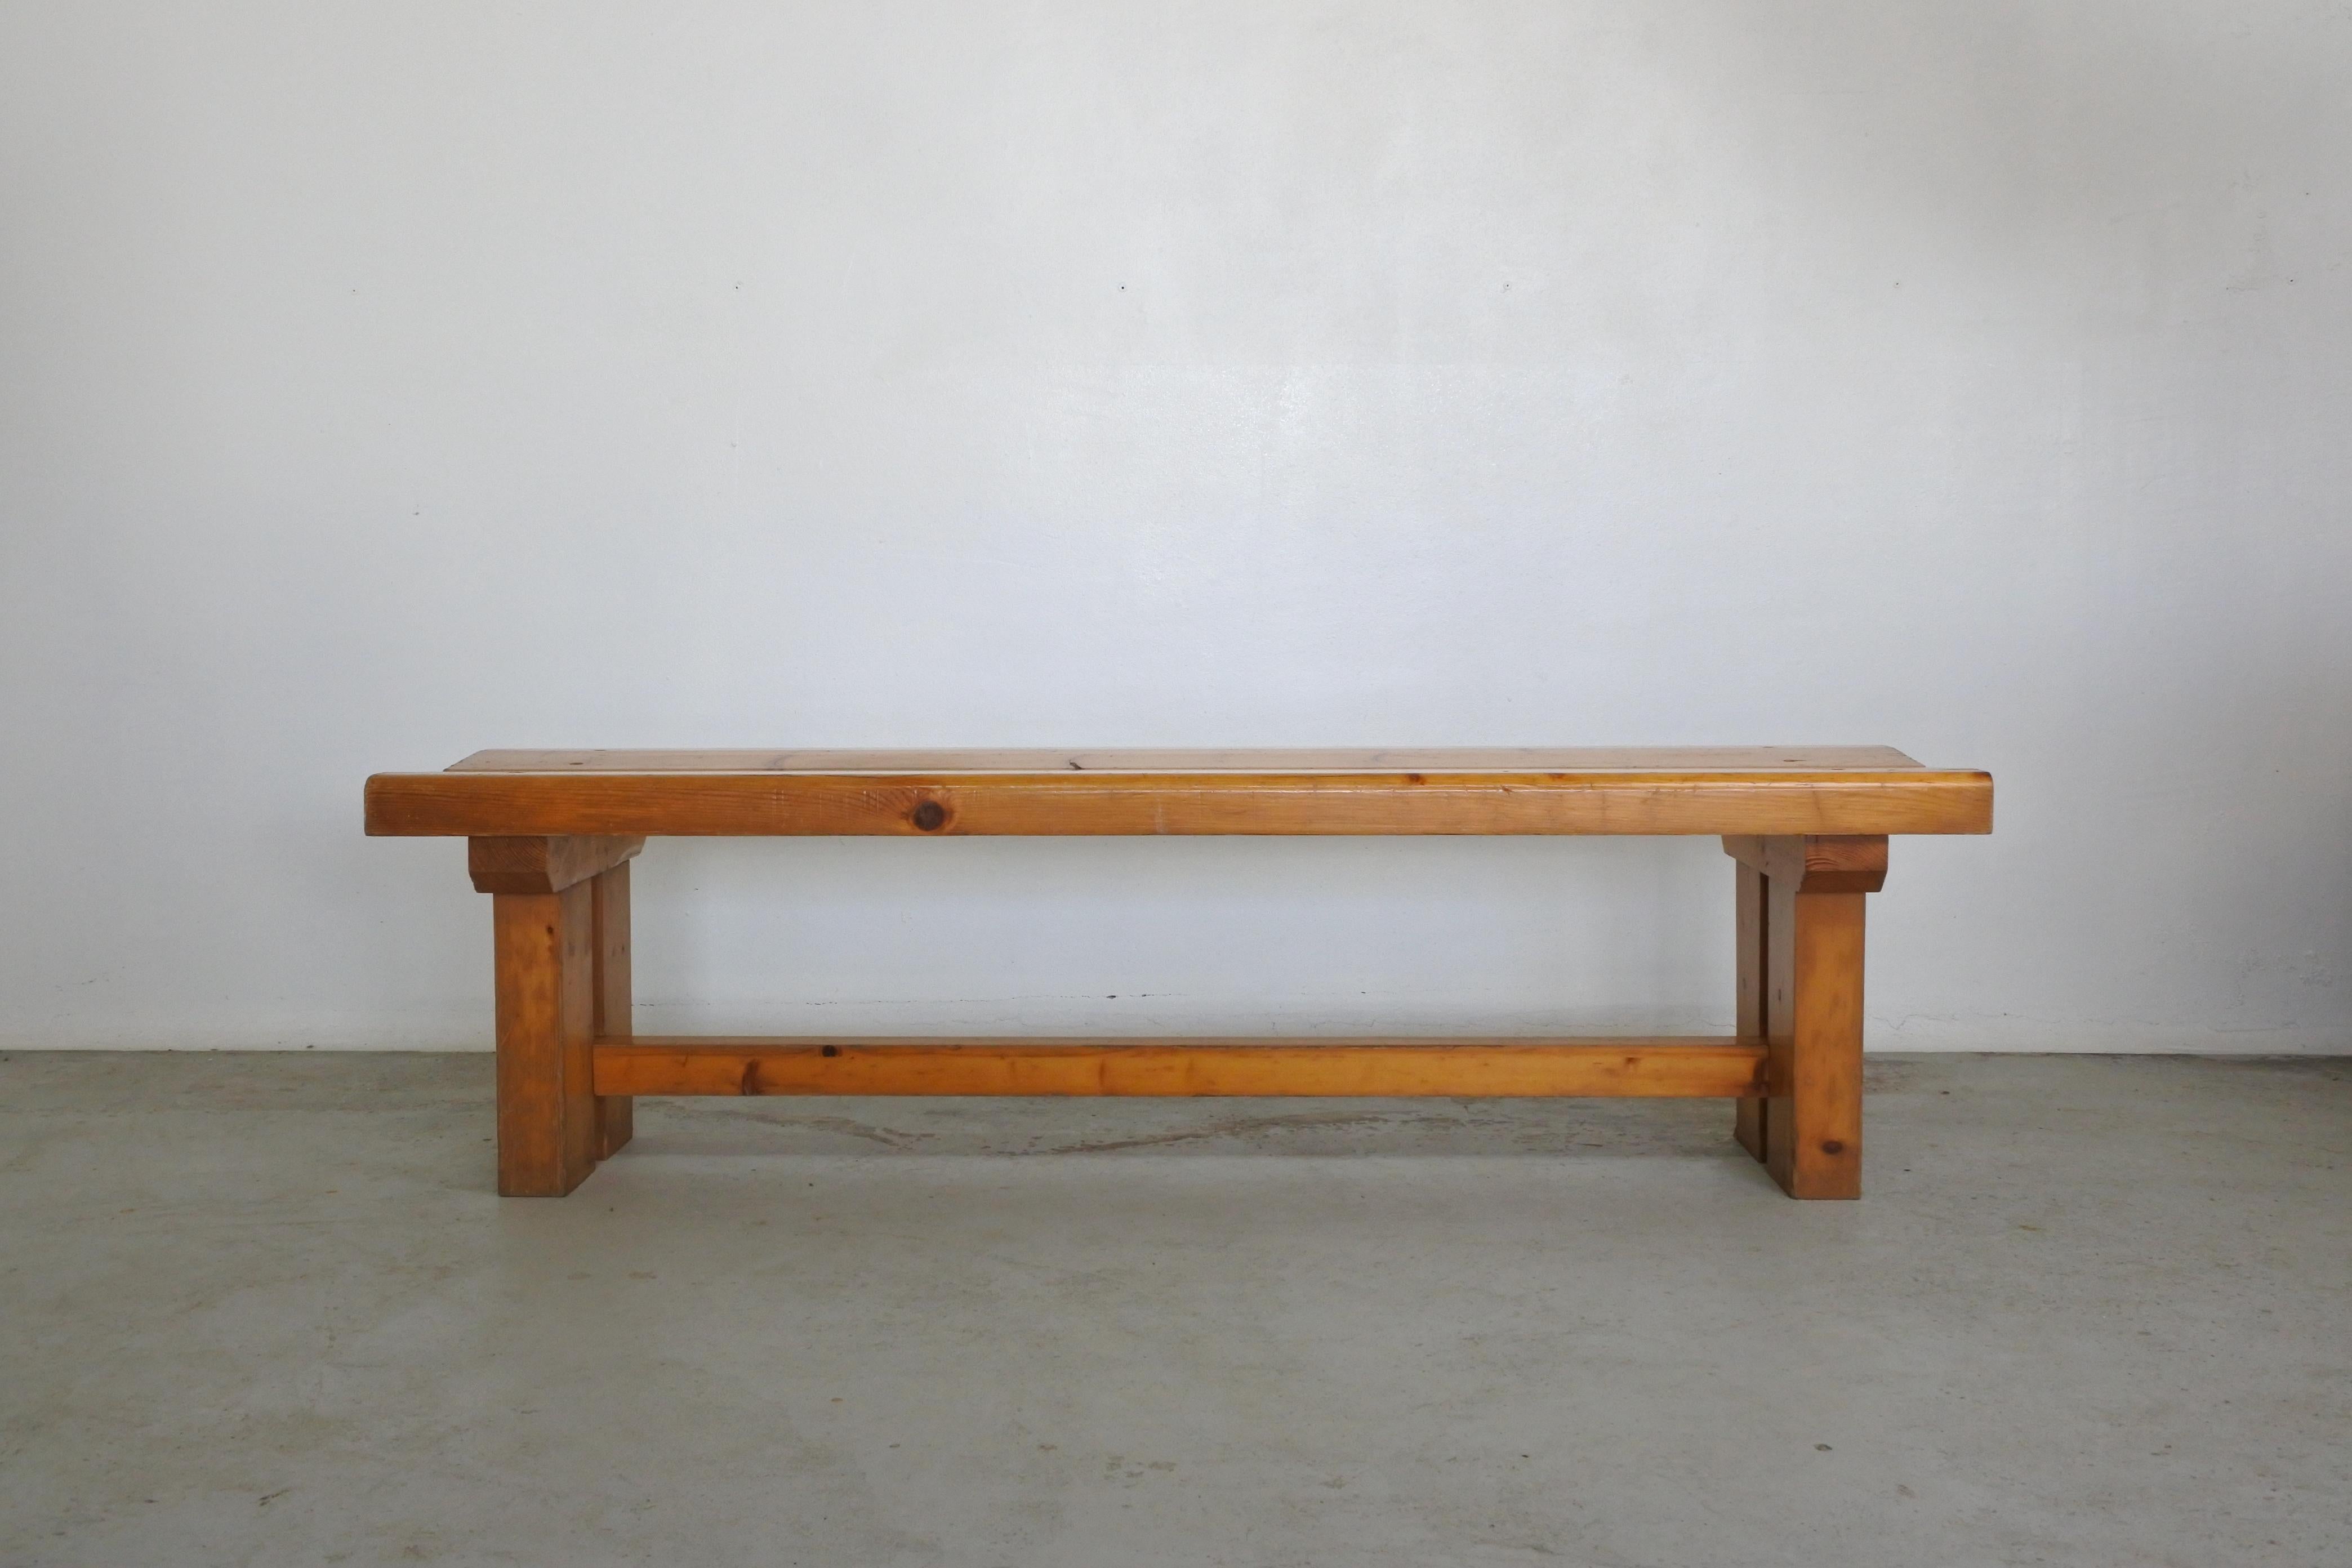 Bench by French designer and architect Charlotte Perriand.
Solid pine wood beams.
Made in 1977.
Full original condition with outstanding patina.

Provenance: Residence 